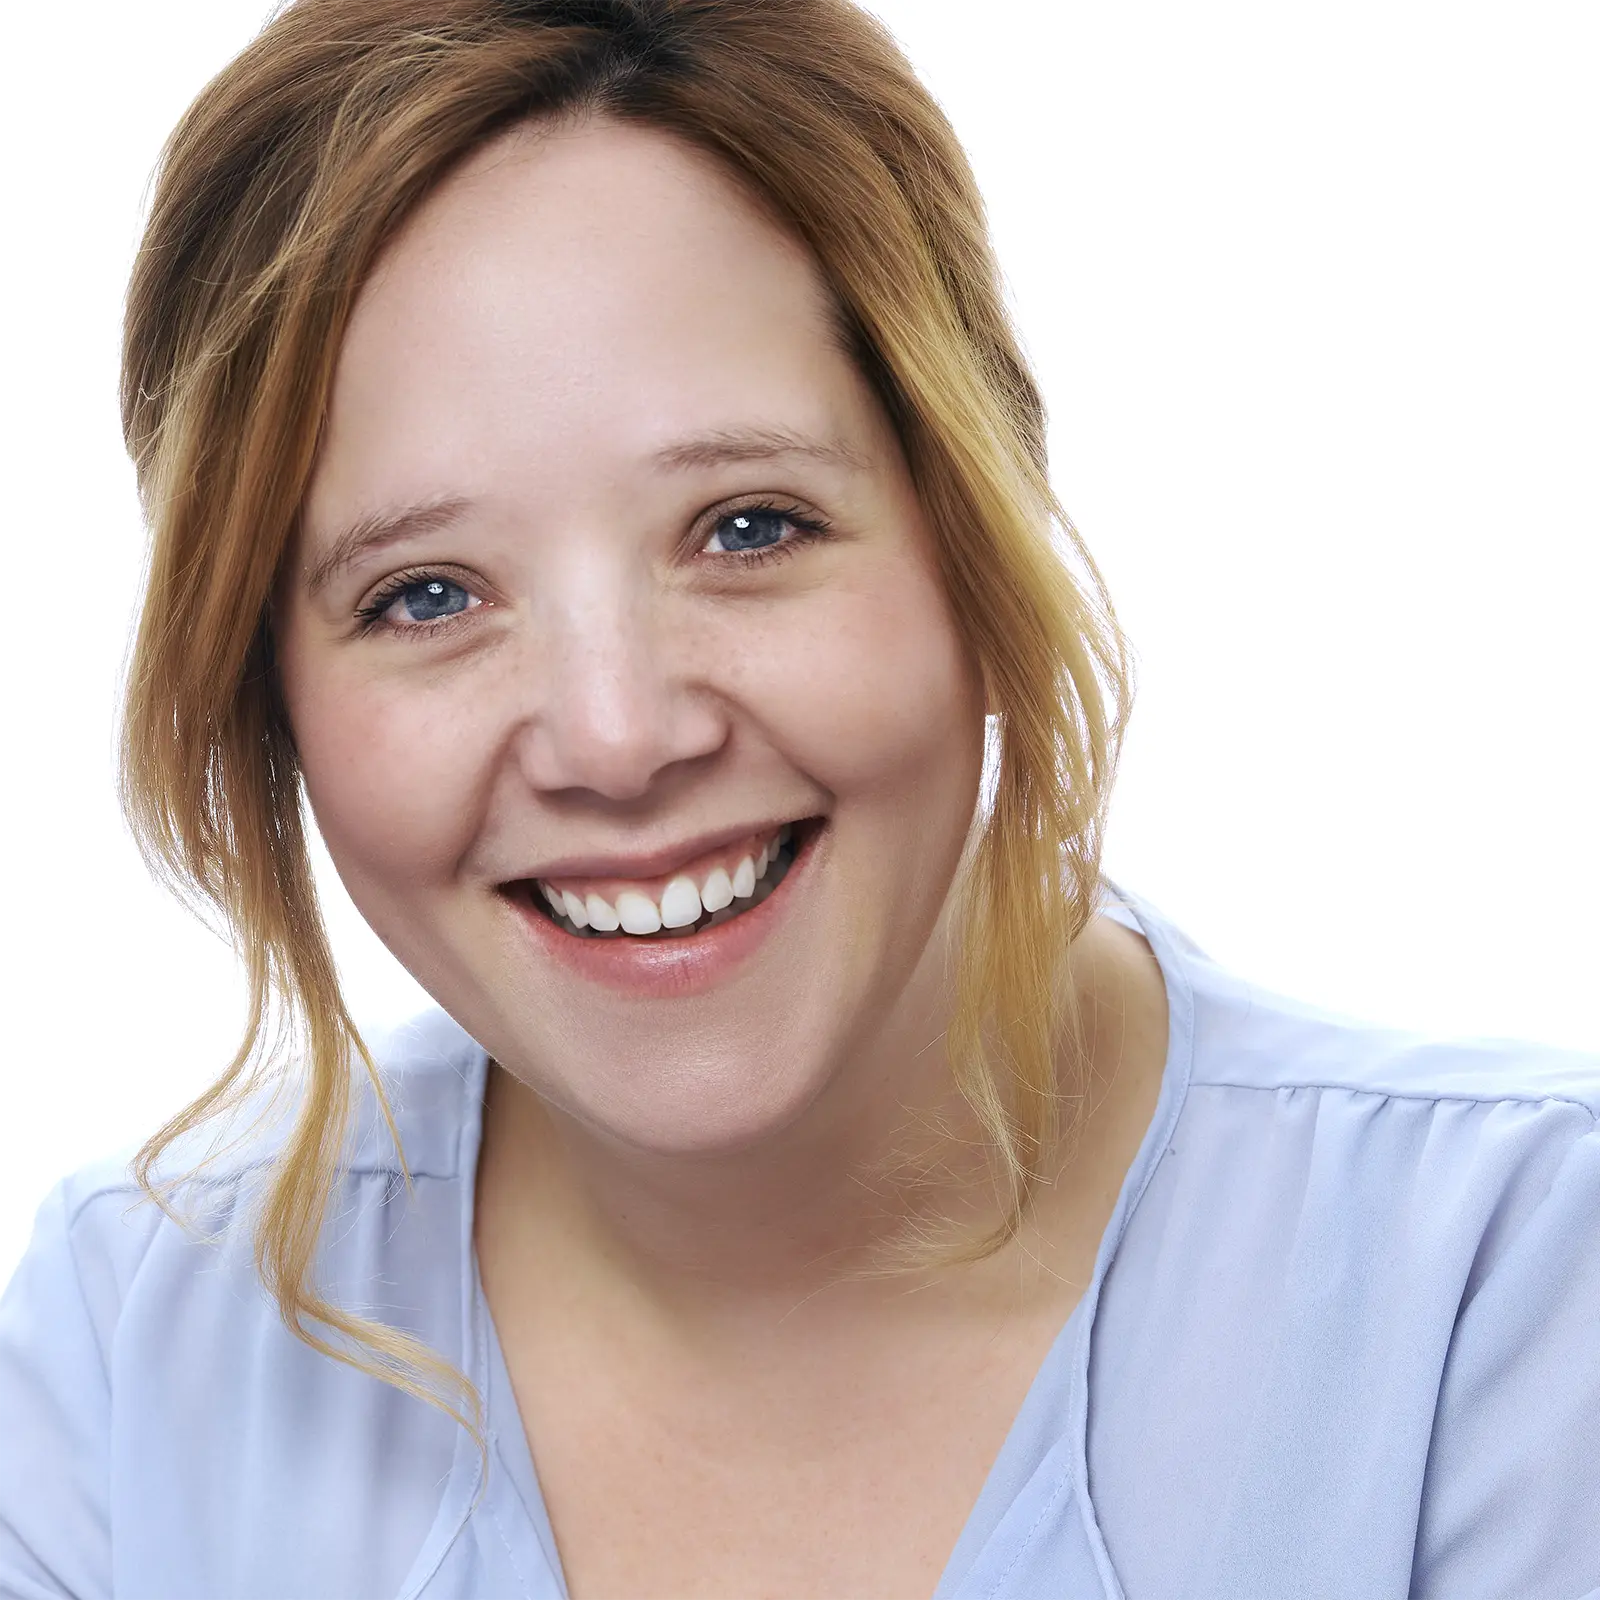 Professional business headshot of a happy and confident looking woman with a white background